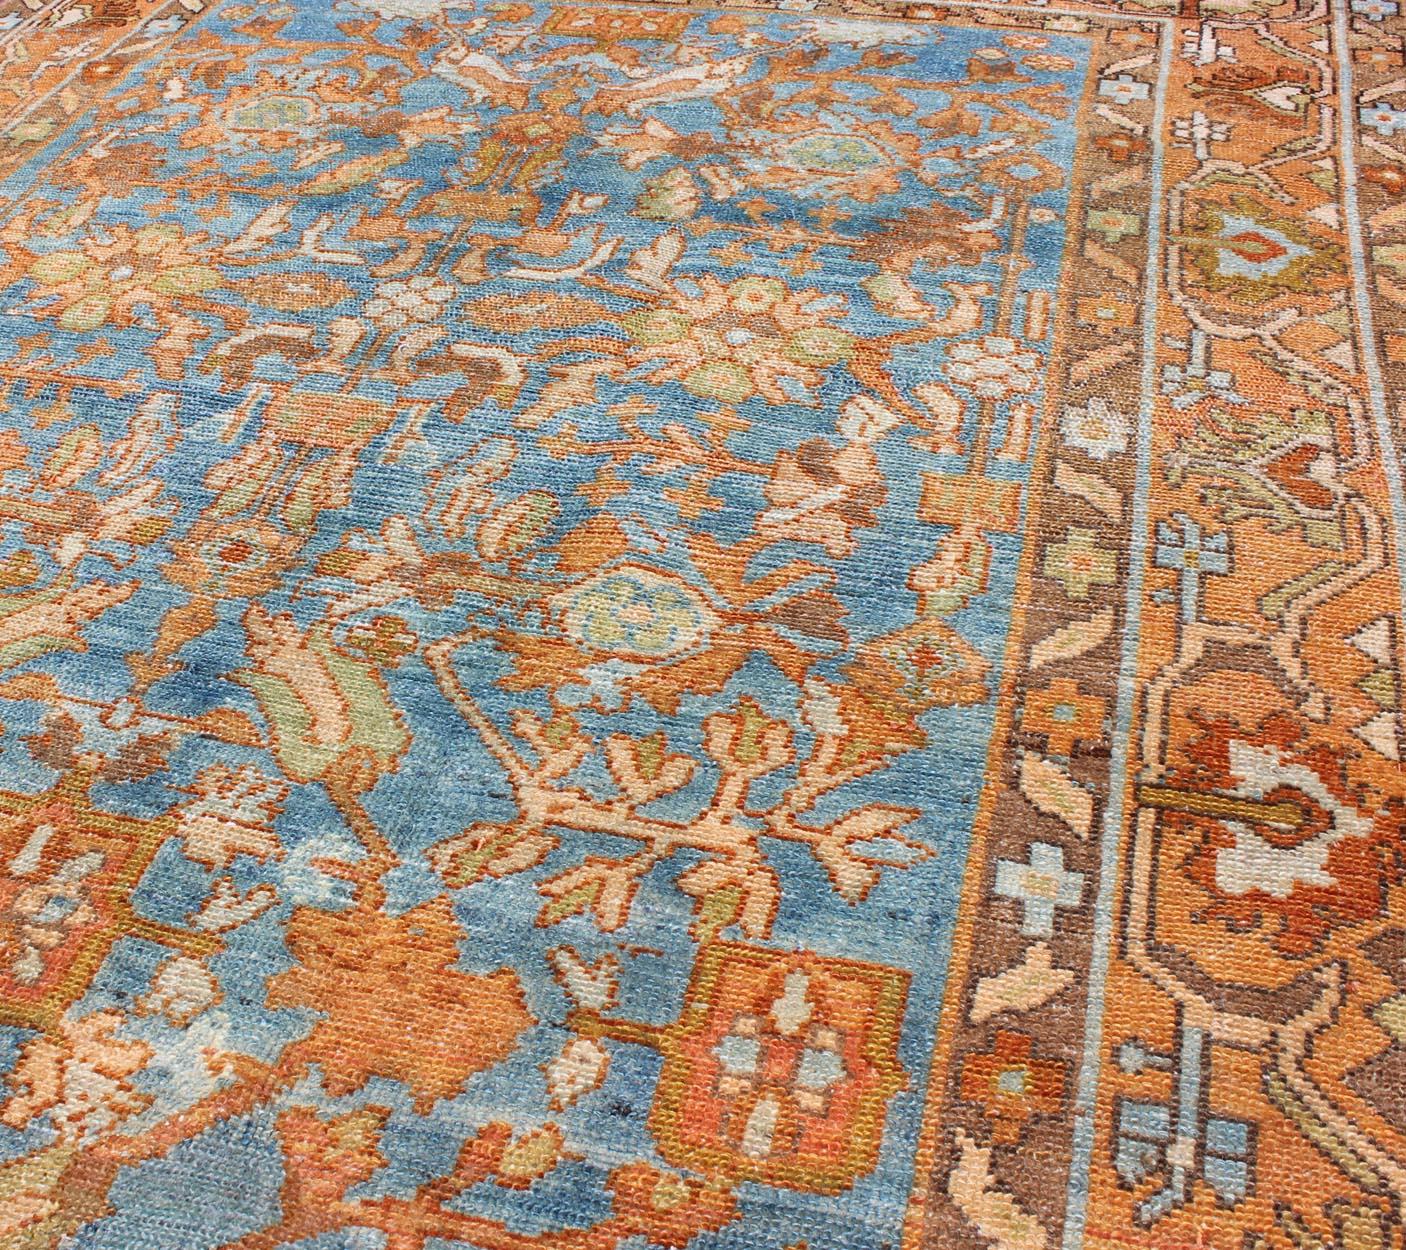 Vibrant Antique Persian Malayer Rug in Shades of Rust, Orange, and Blue For Sale 3